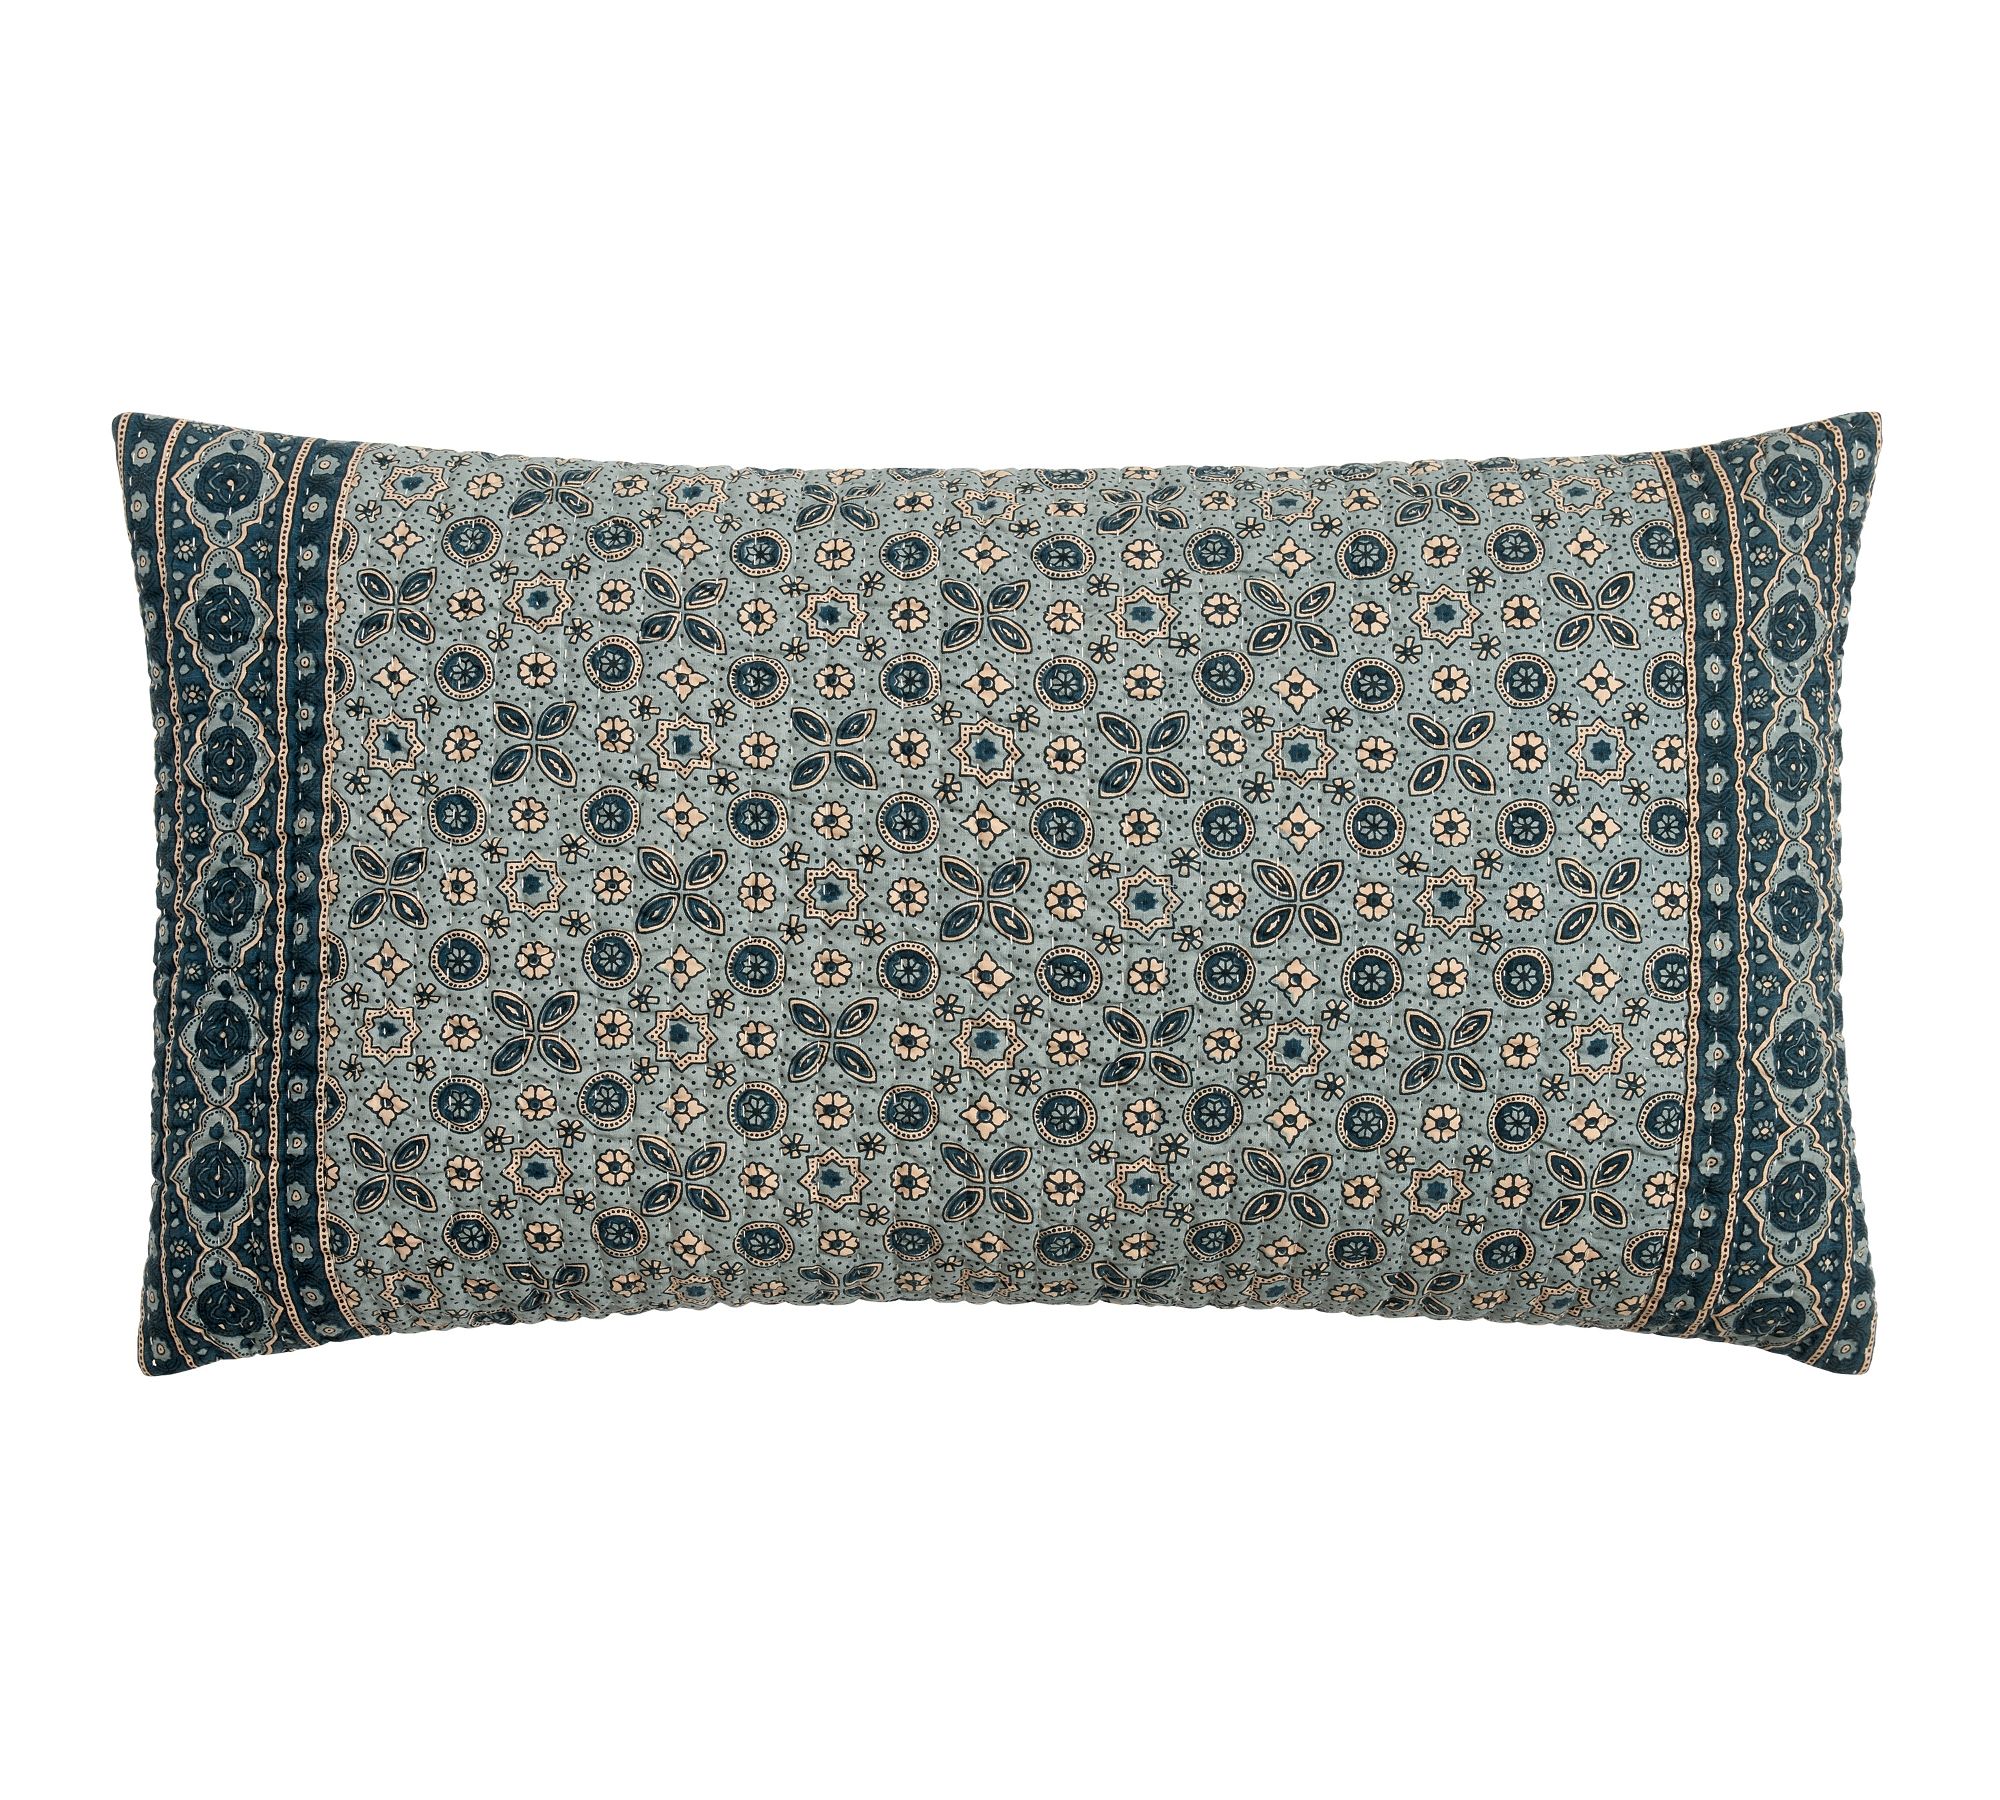 Auden Pick-Stitch Handcrafted Reversible Quilted Sham